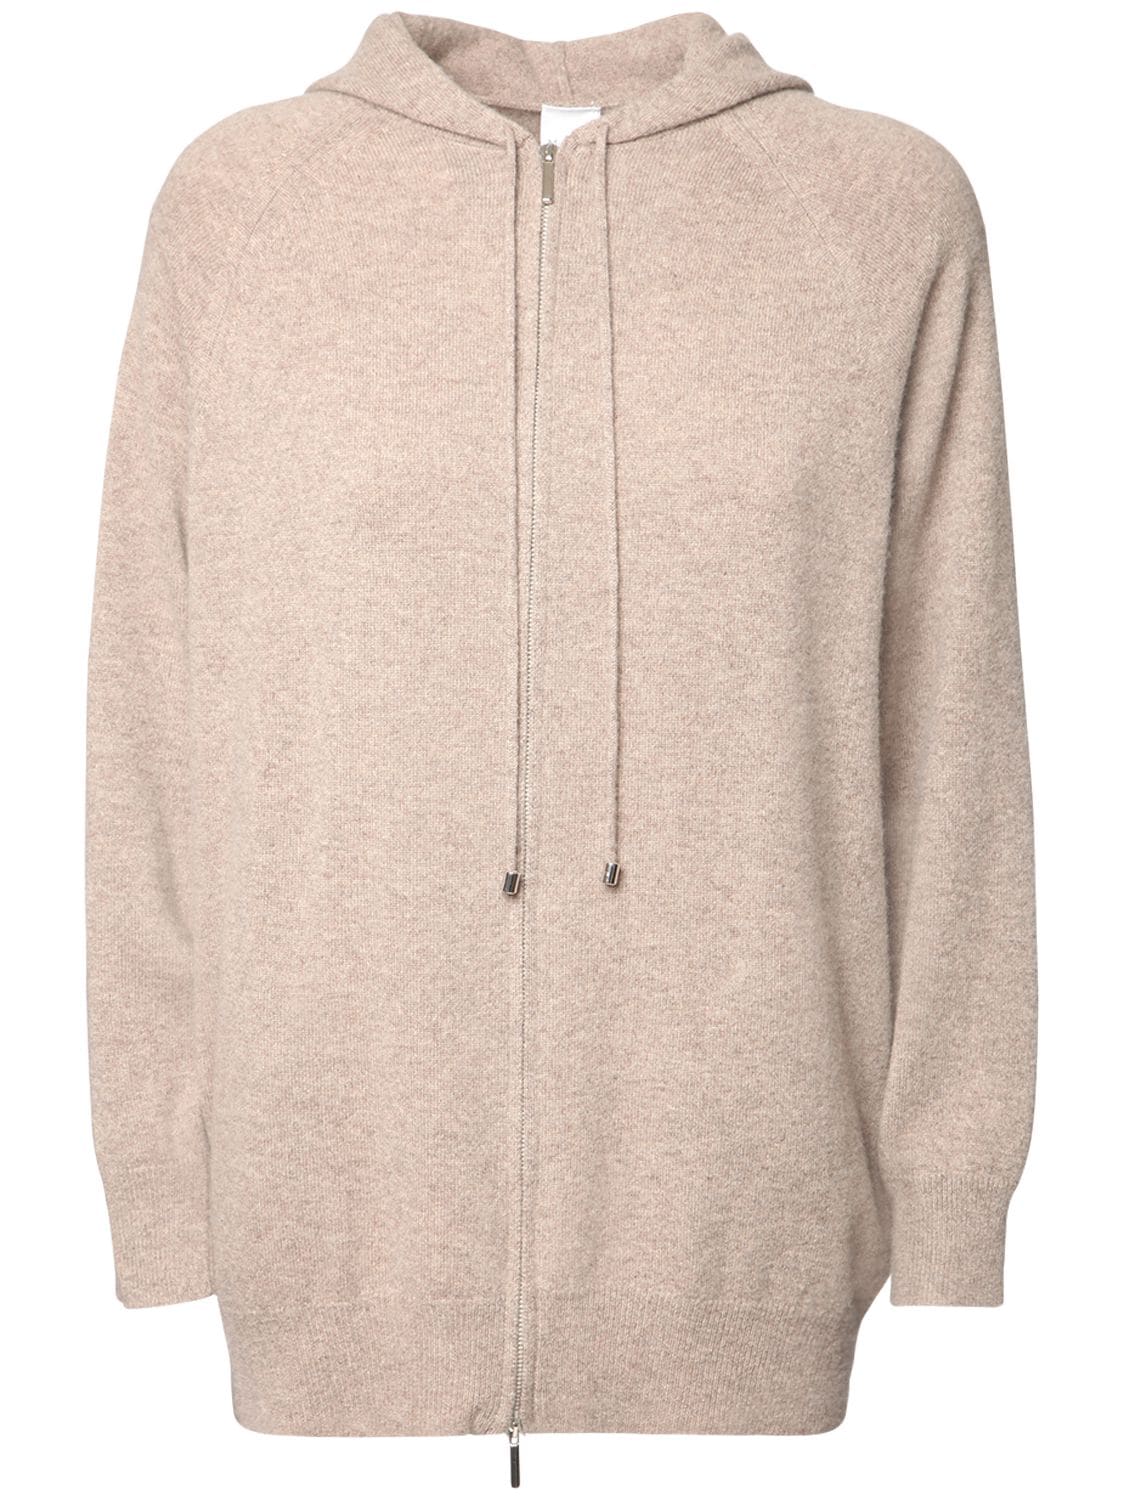 MAX MARA CASHMERE KNIT ZIP-UP HOODIE,72IF4V030-MDAZ0